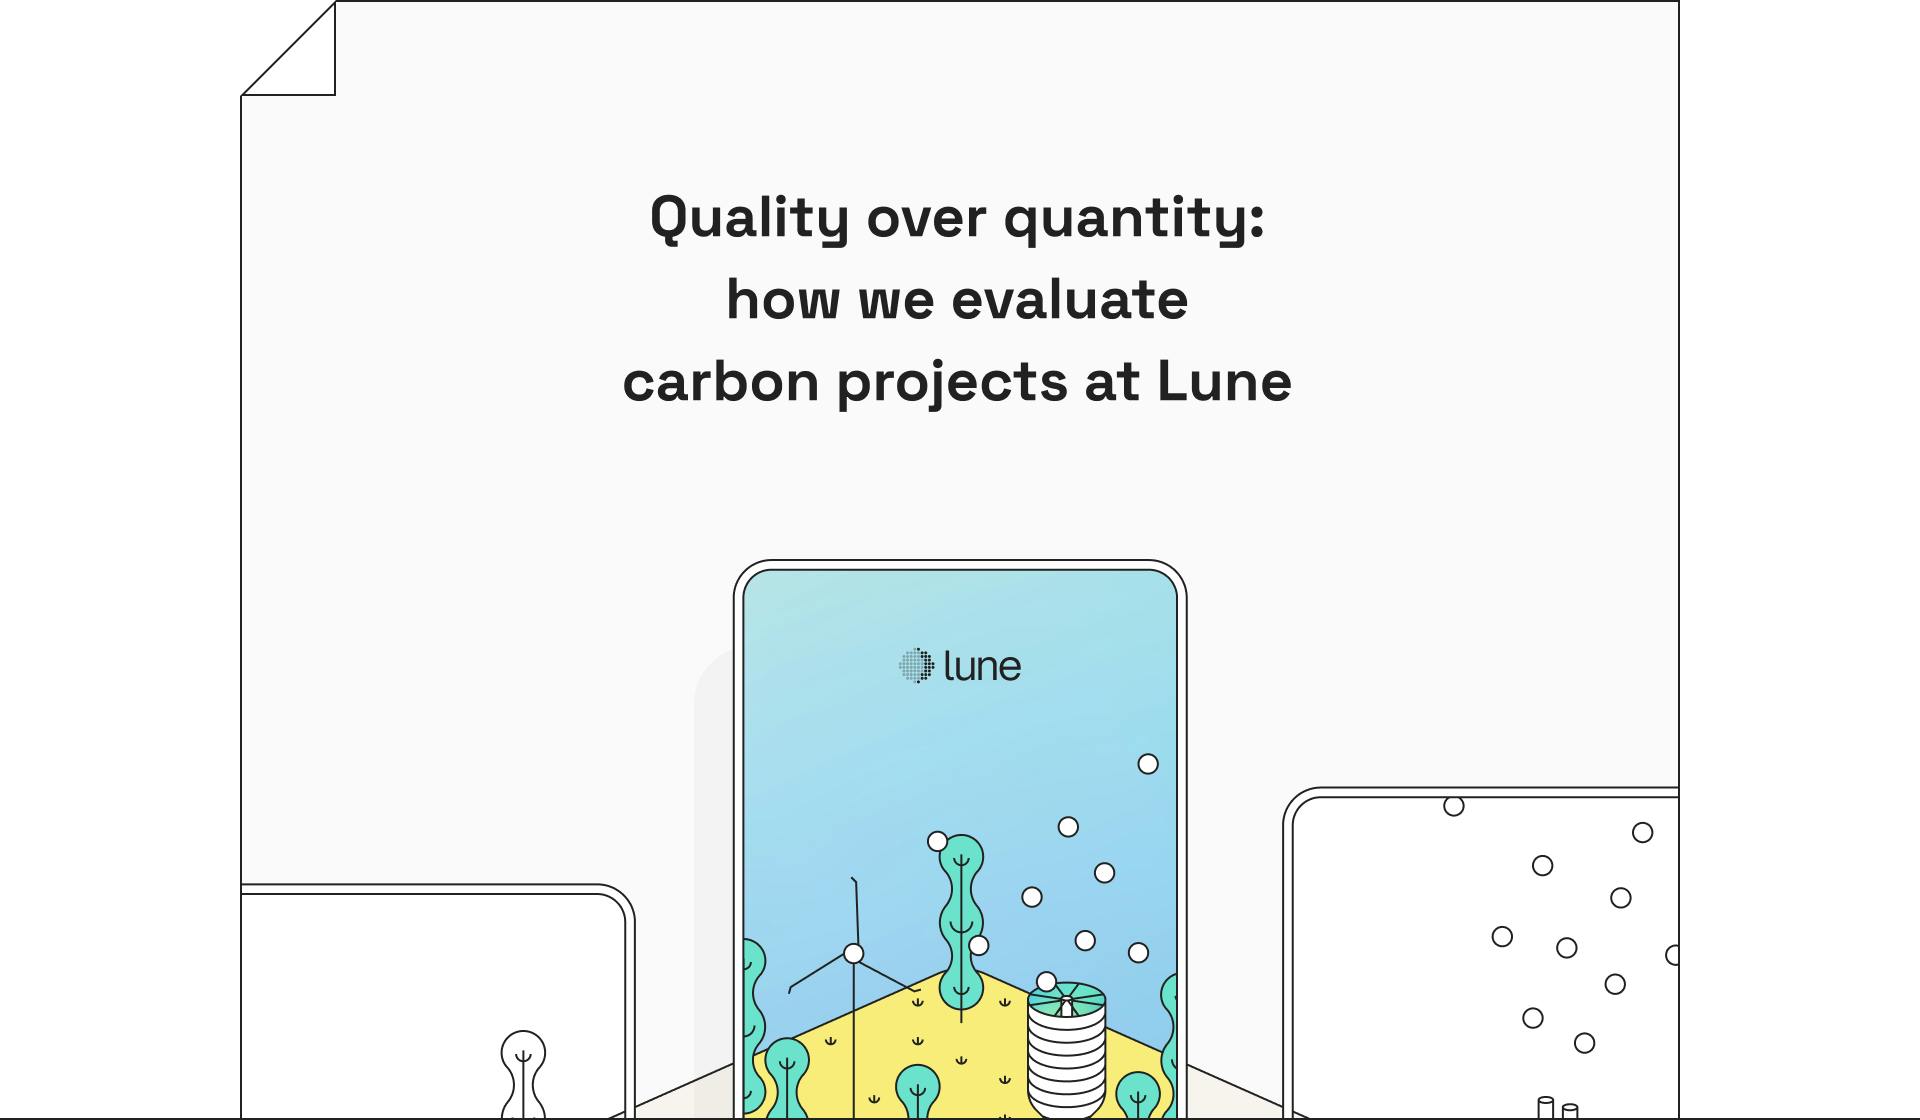 Quality over quantity: how we evaluate carbon projects at Lune